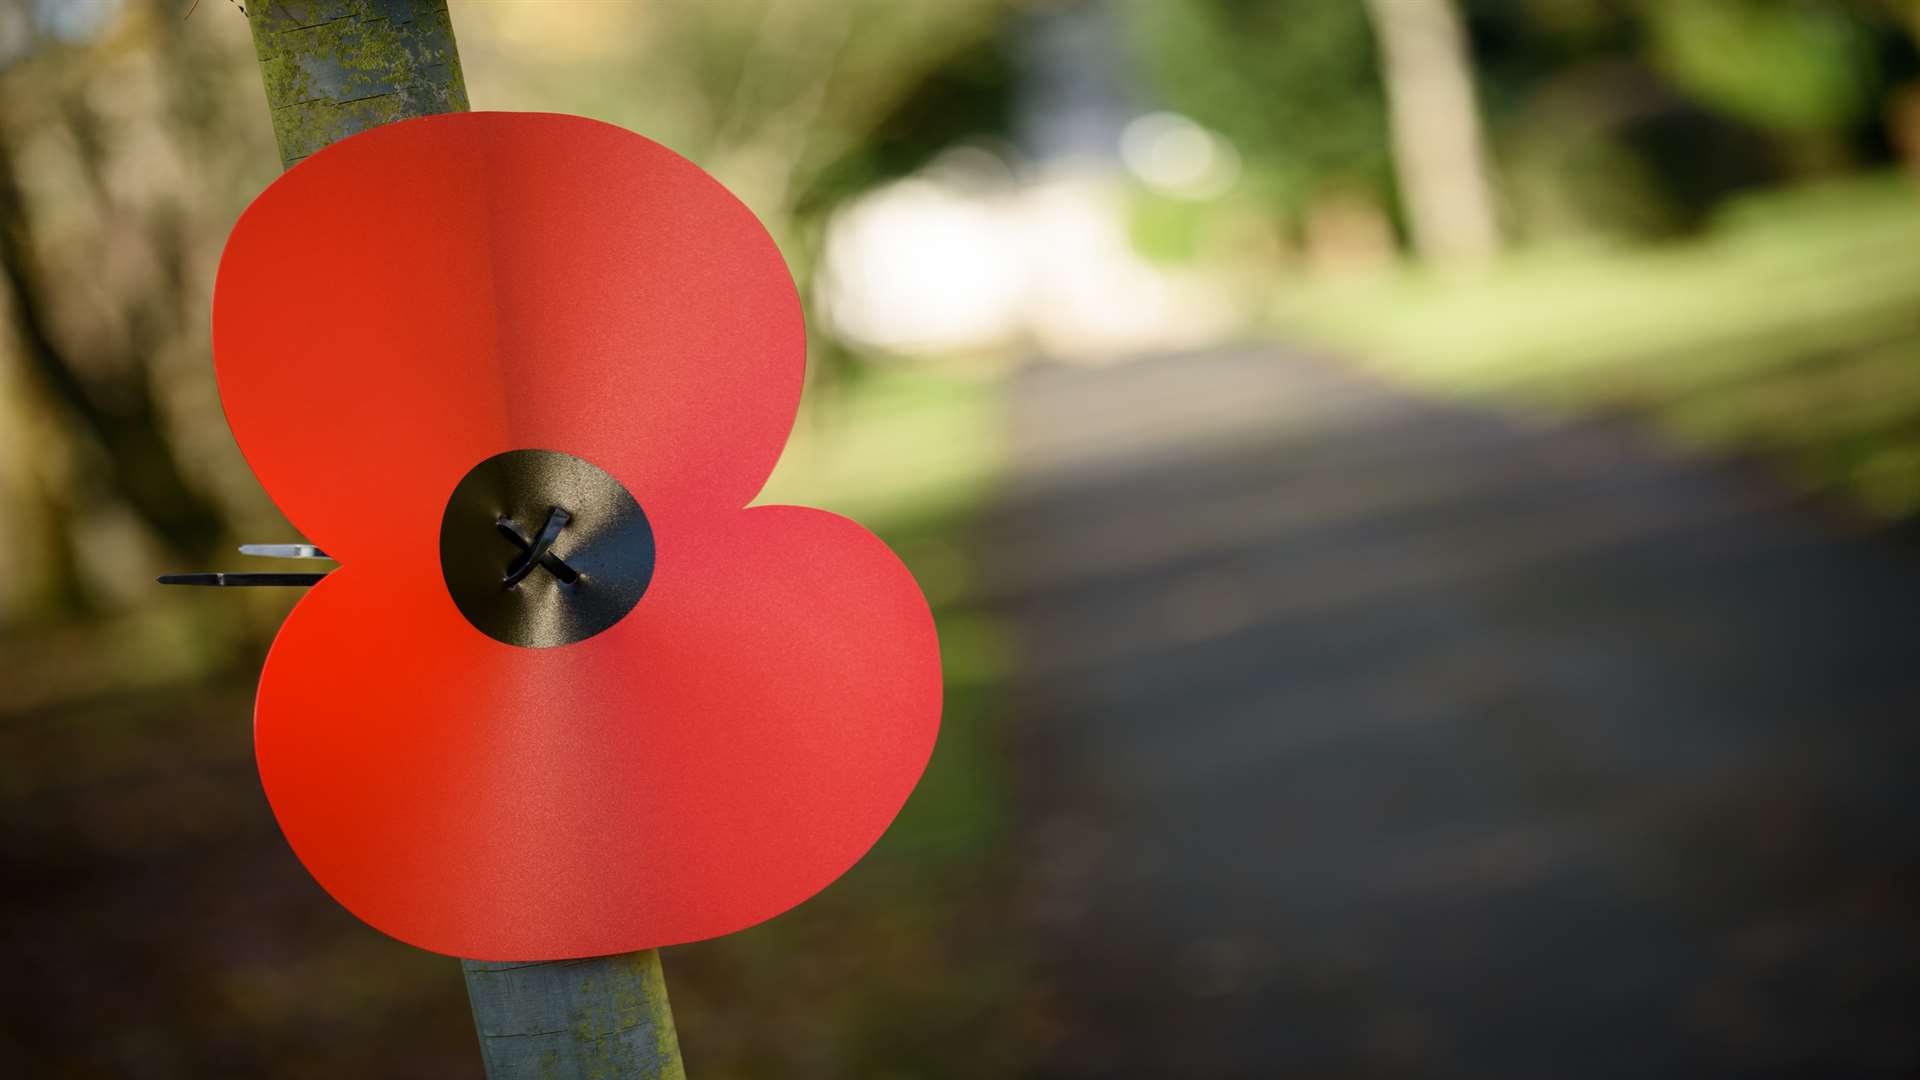 Families can find out more about the First World War on a self-guided trail